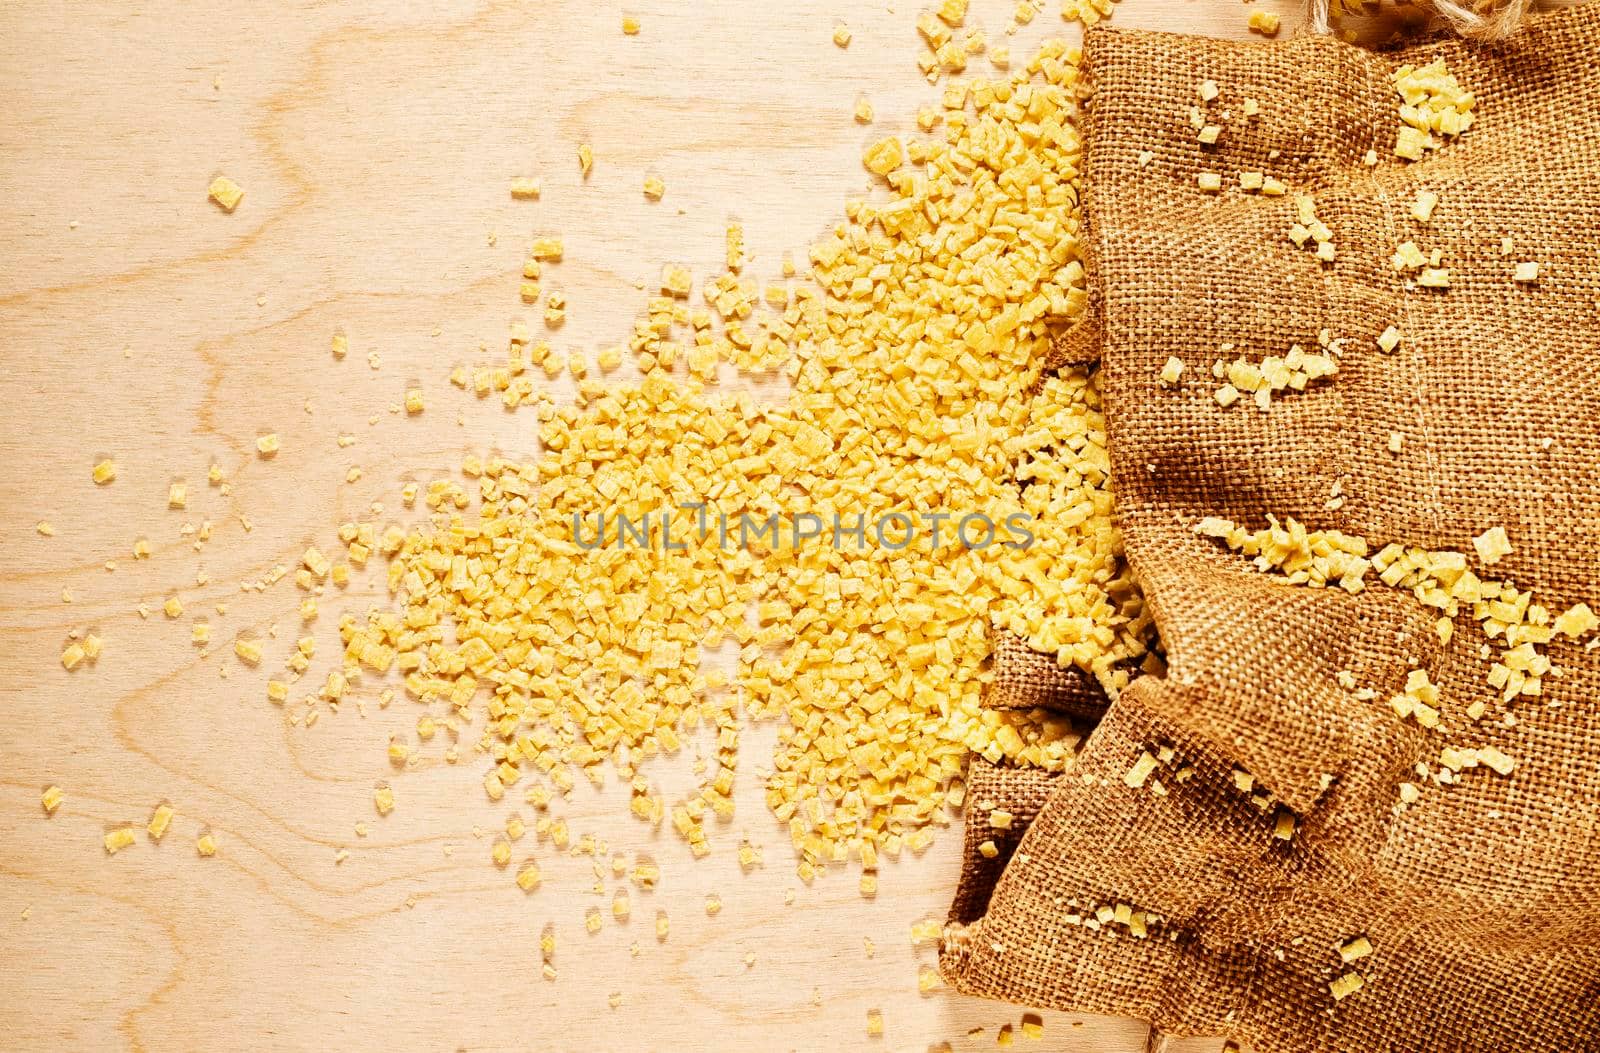  Small flat squares  egg pasta called grattini on brown bag on wooden background,yellow  pasta with rough surface 